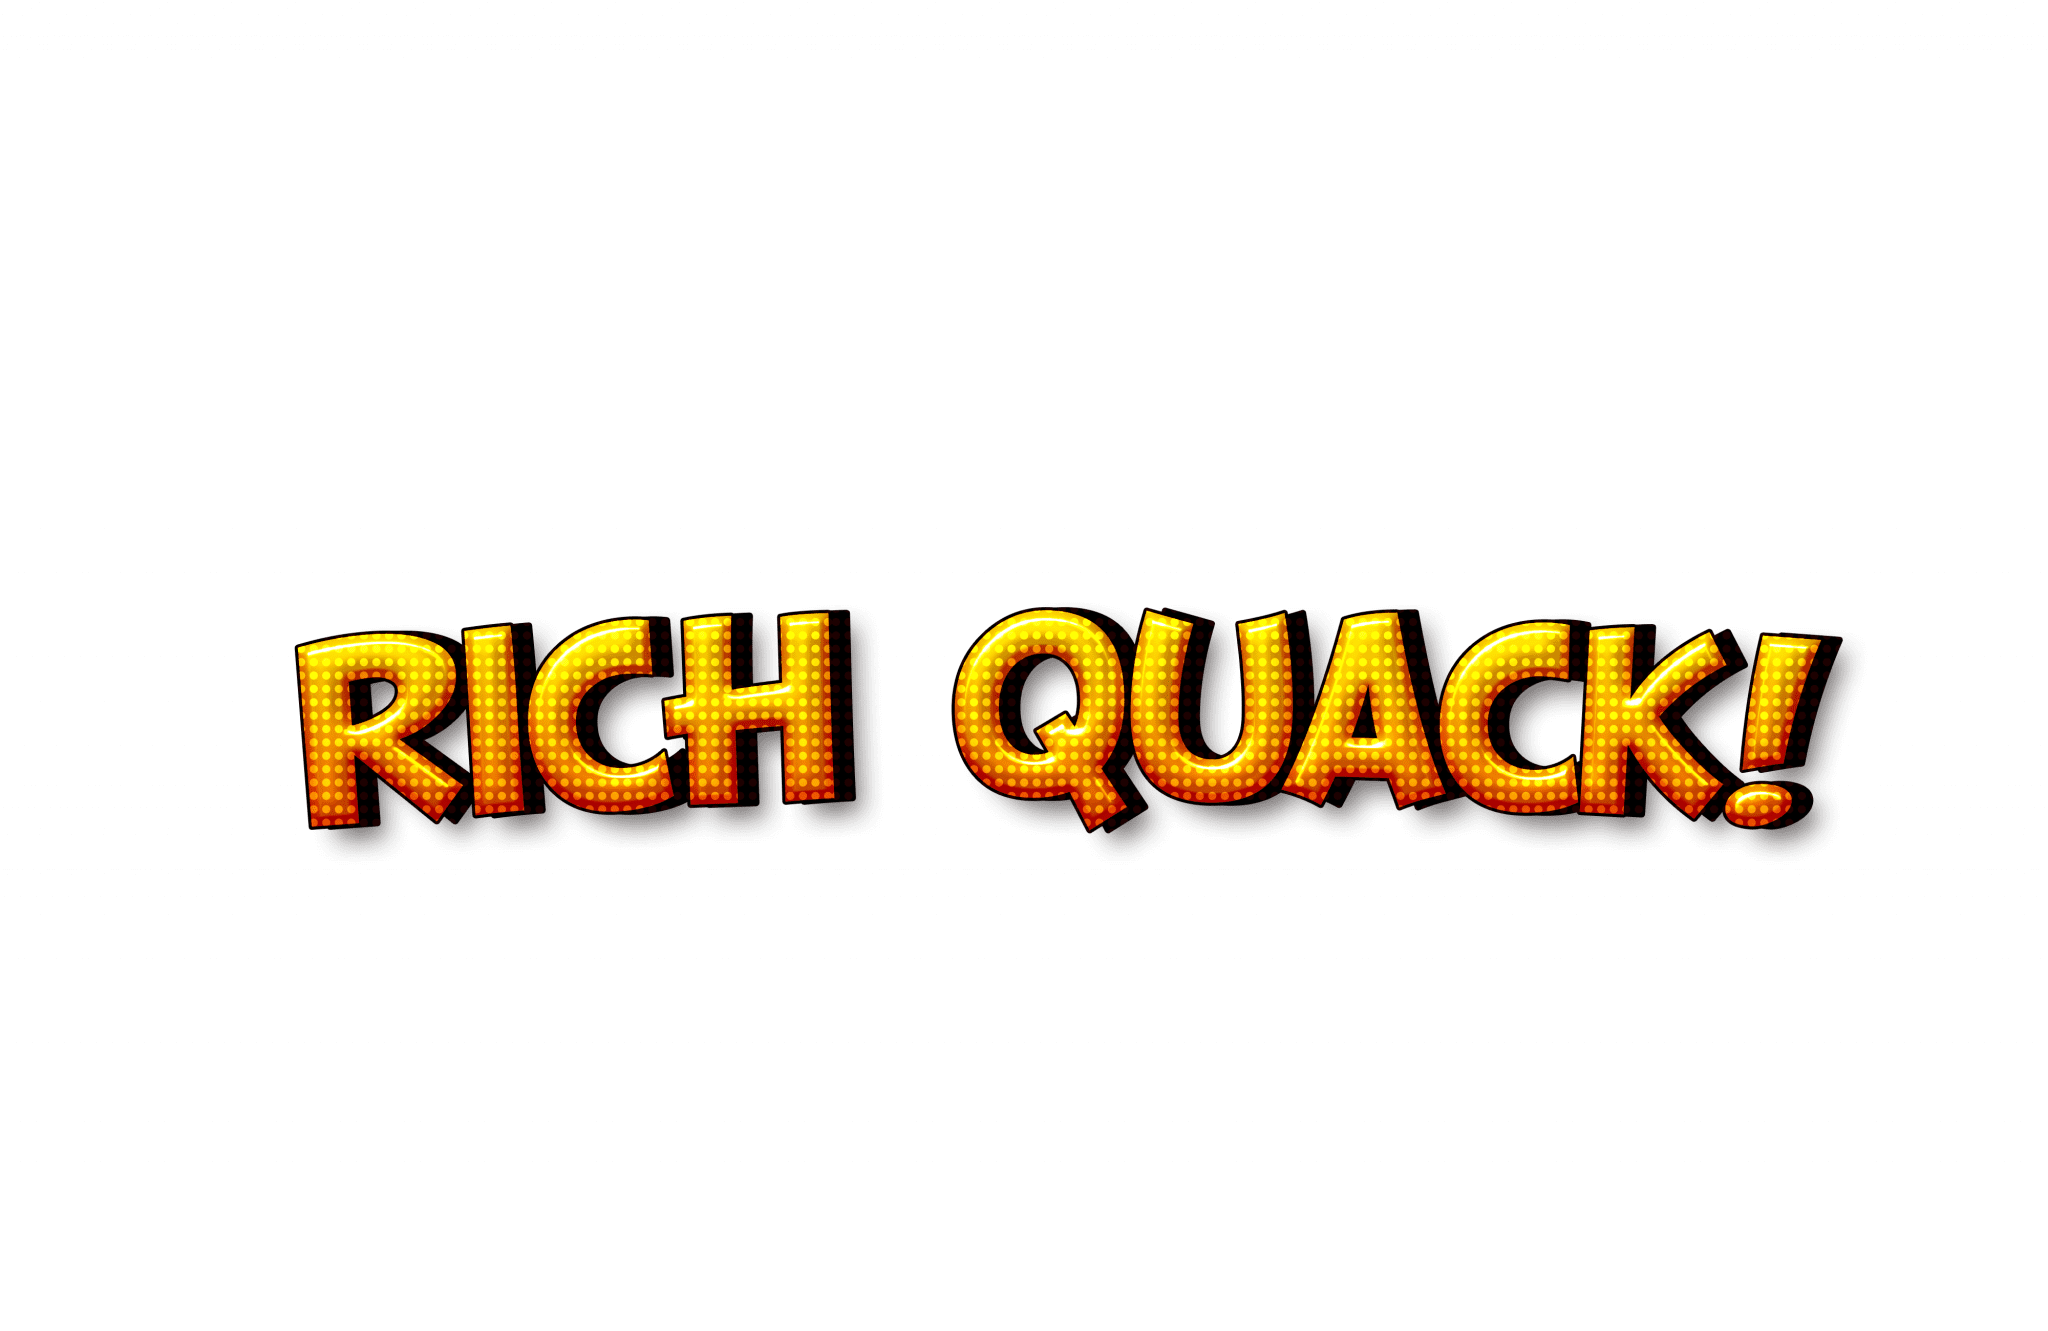 RichQuack launches hyper-deflationary token with high liquidity rewarding holders with static rewards